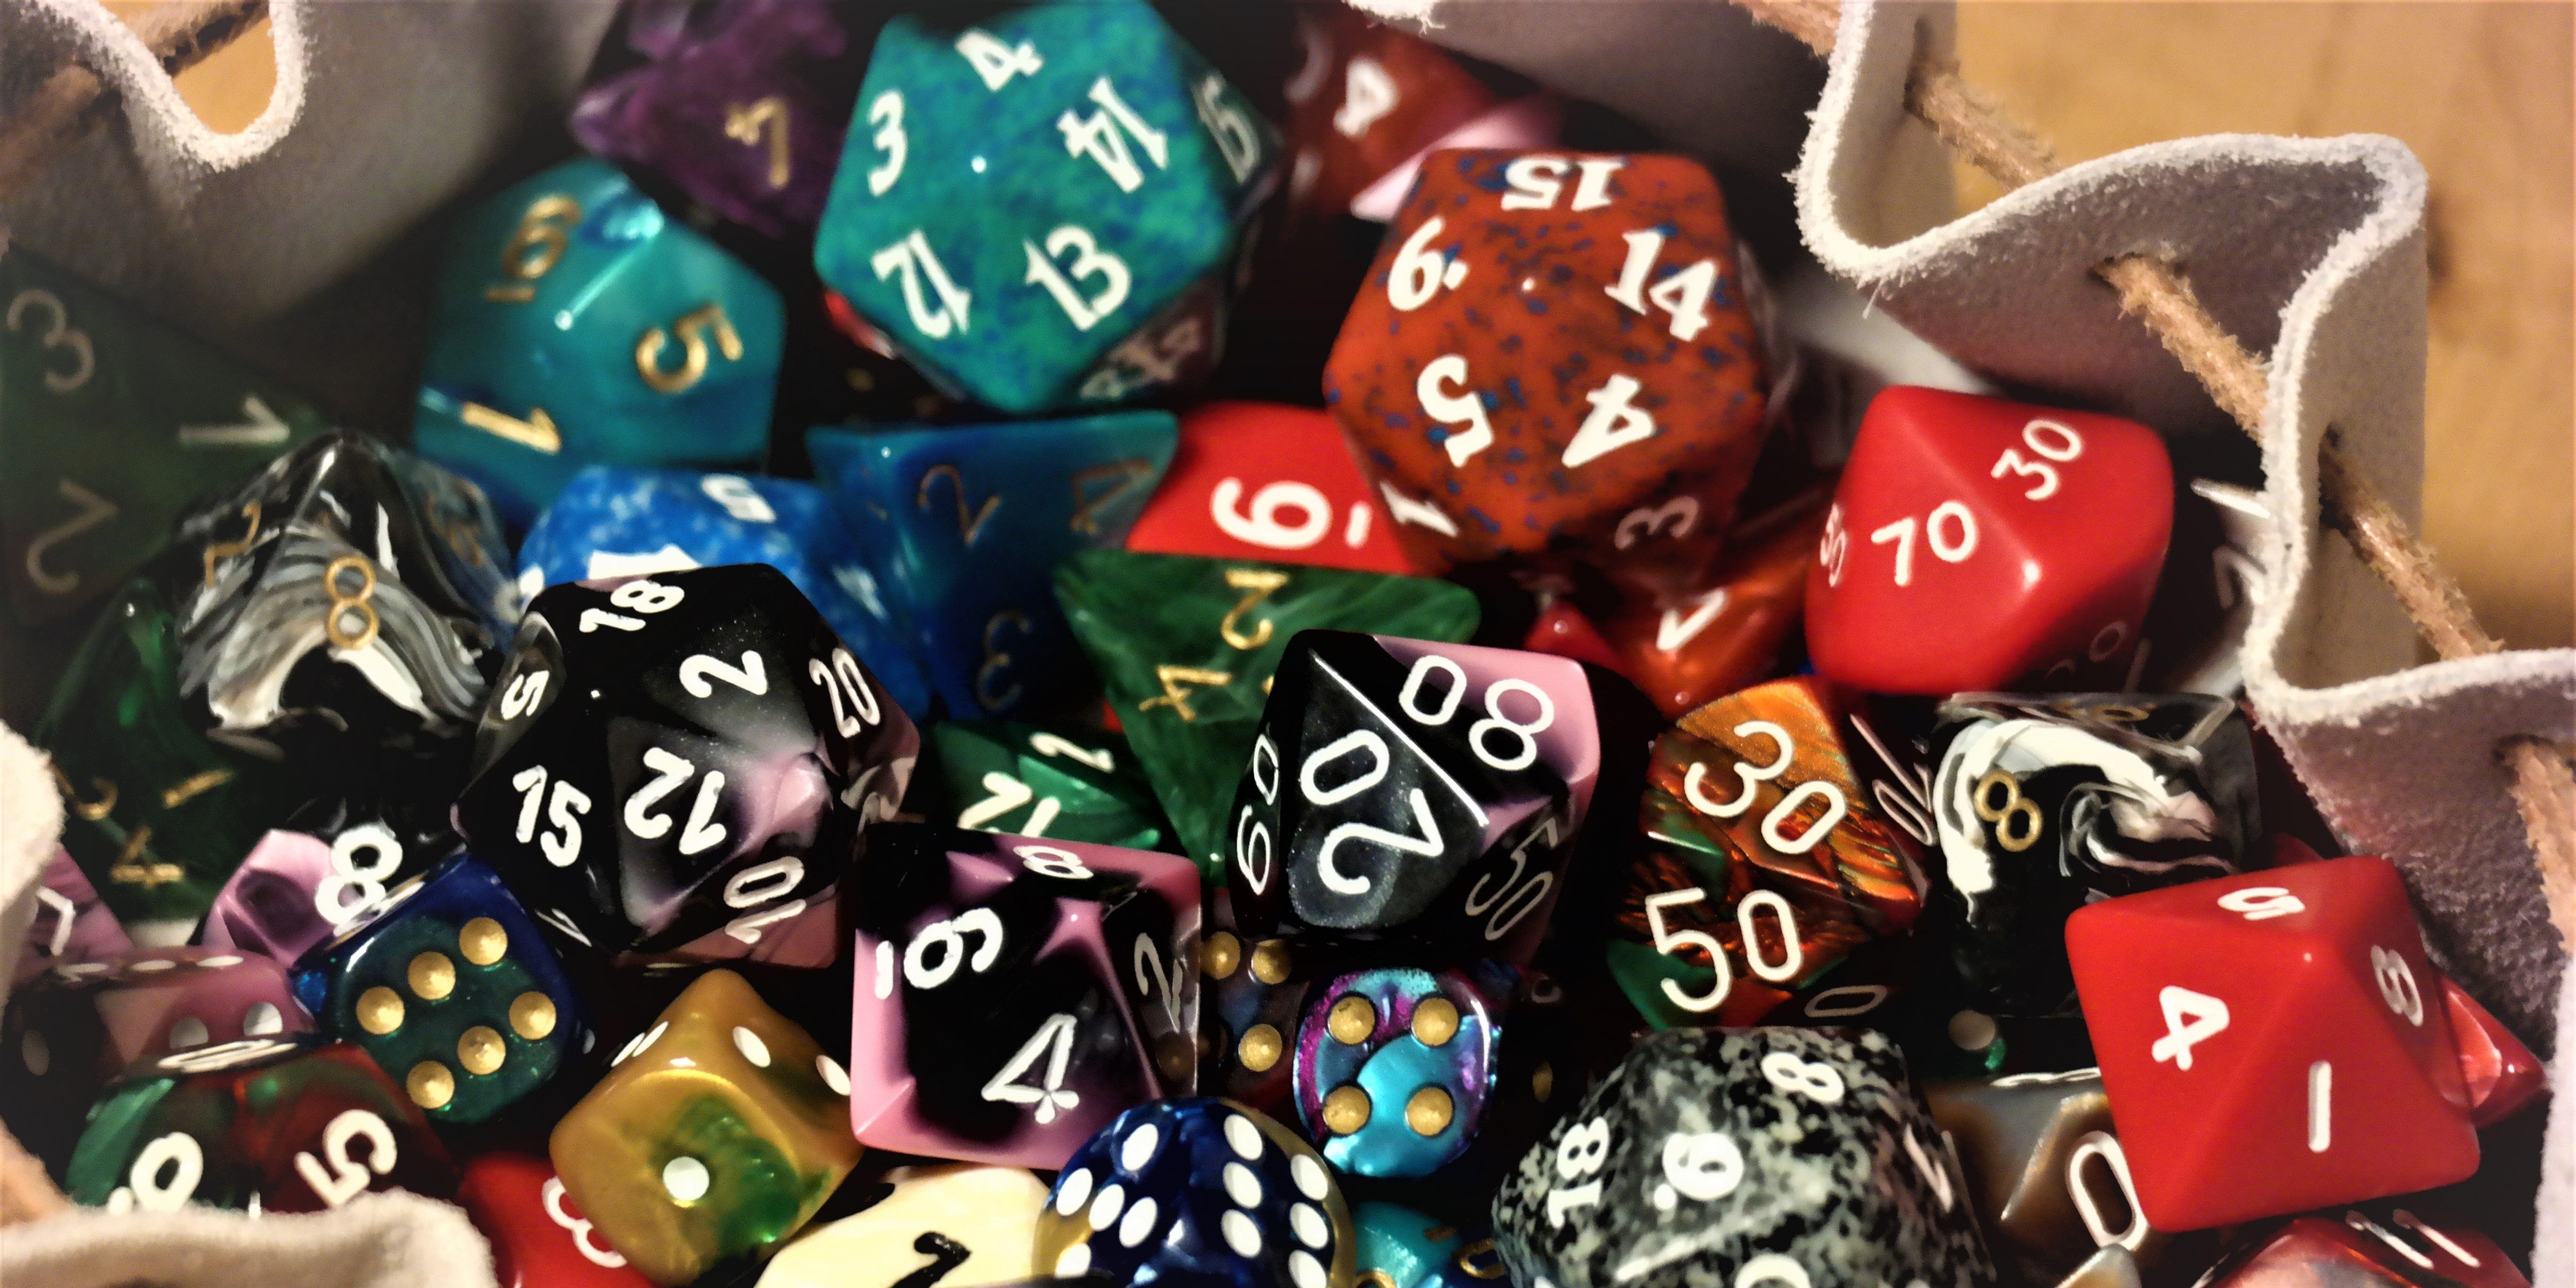 A bag of multicolored gaming dice